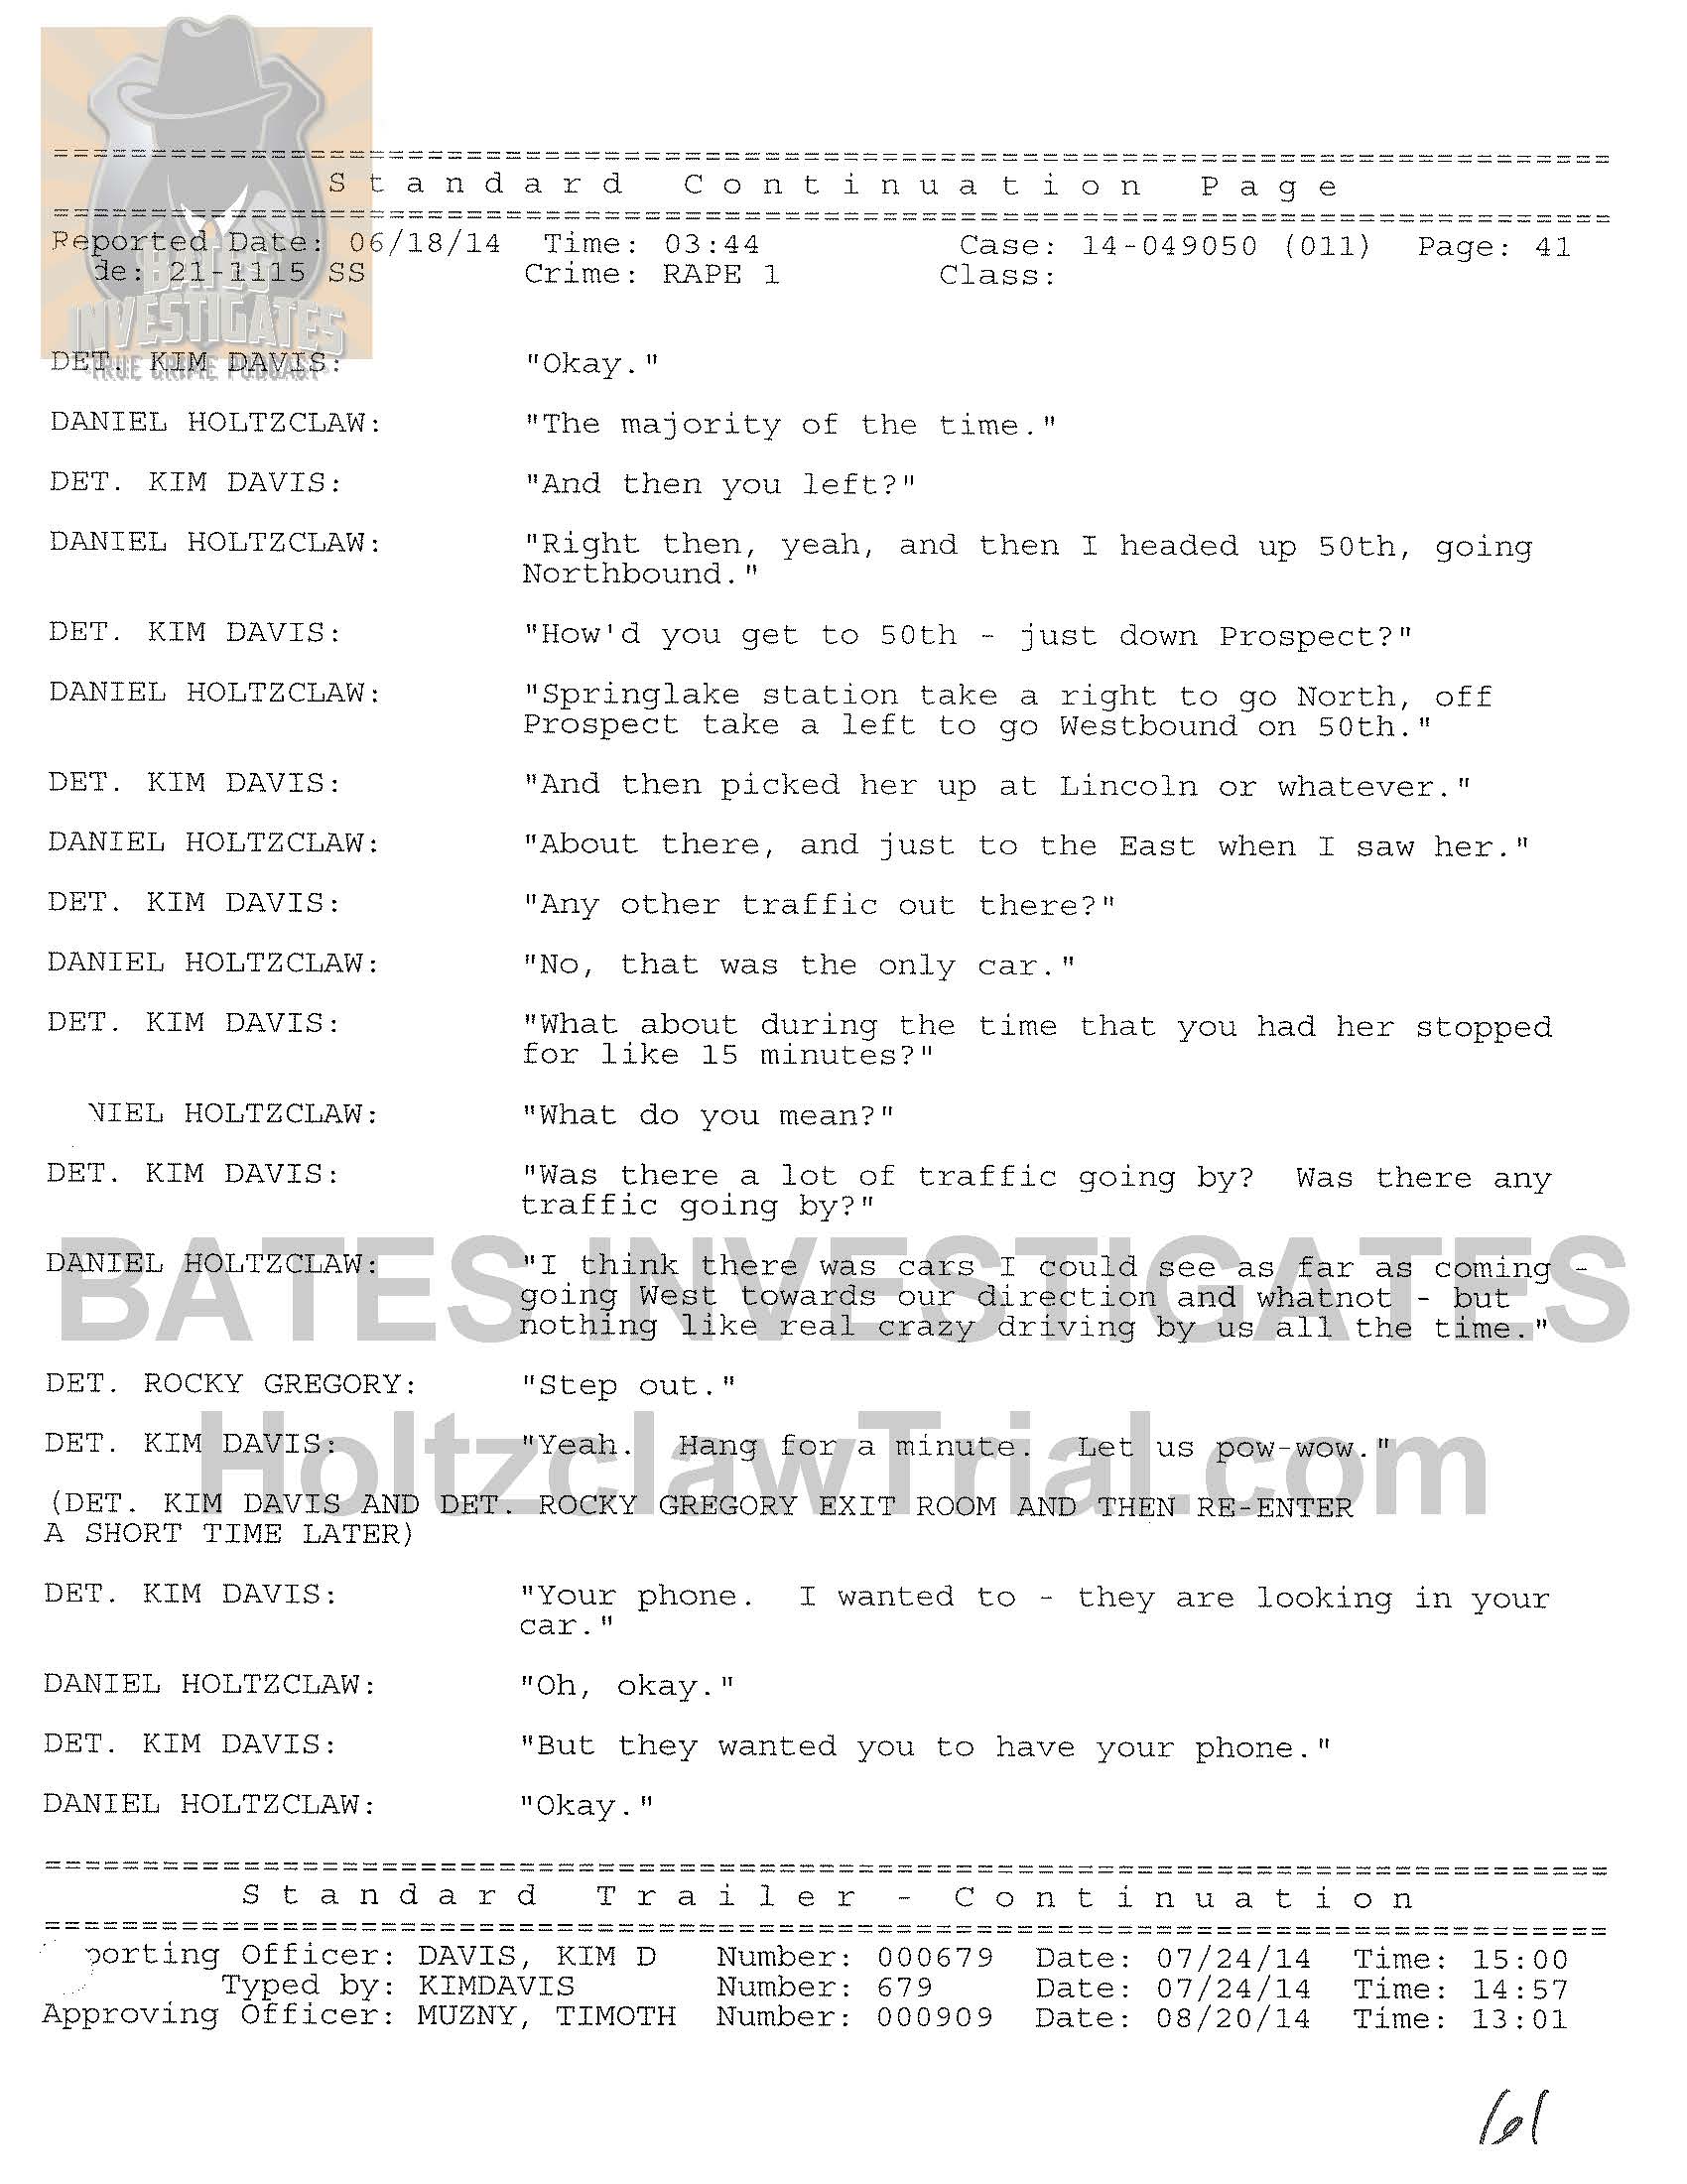 Holtzclaw Interrogation Transcript - Ep02 Redacted_Page_41.jpg